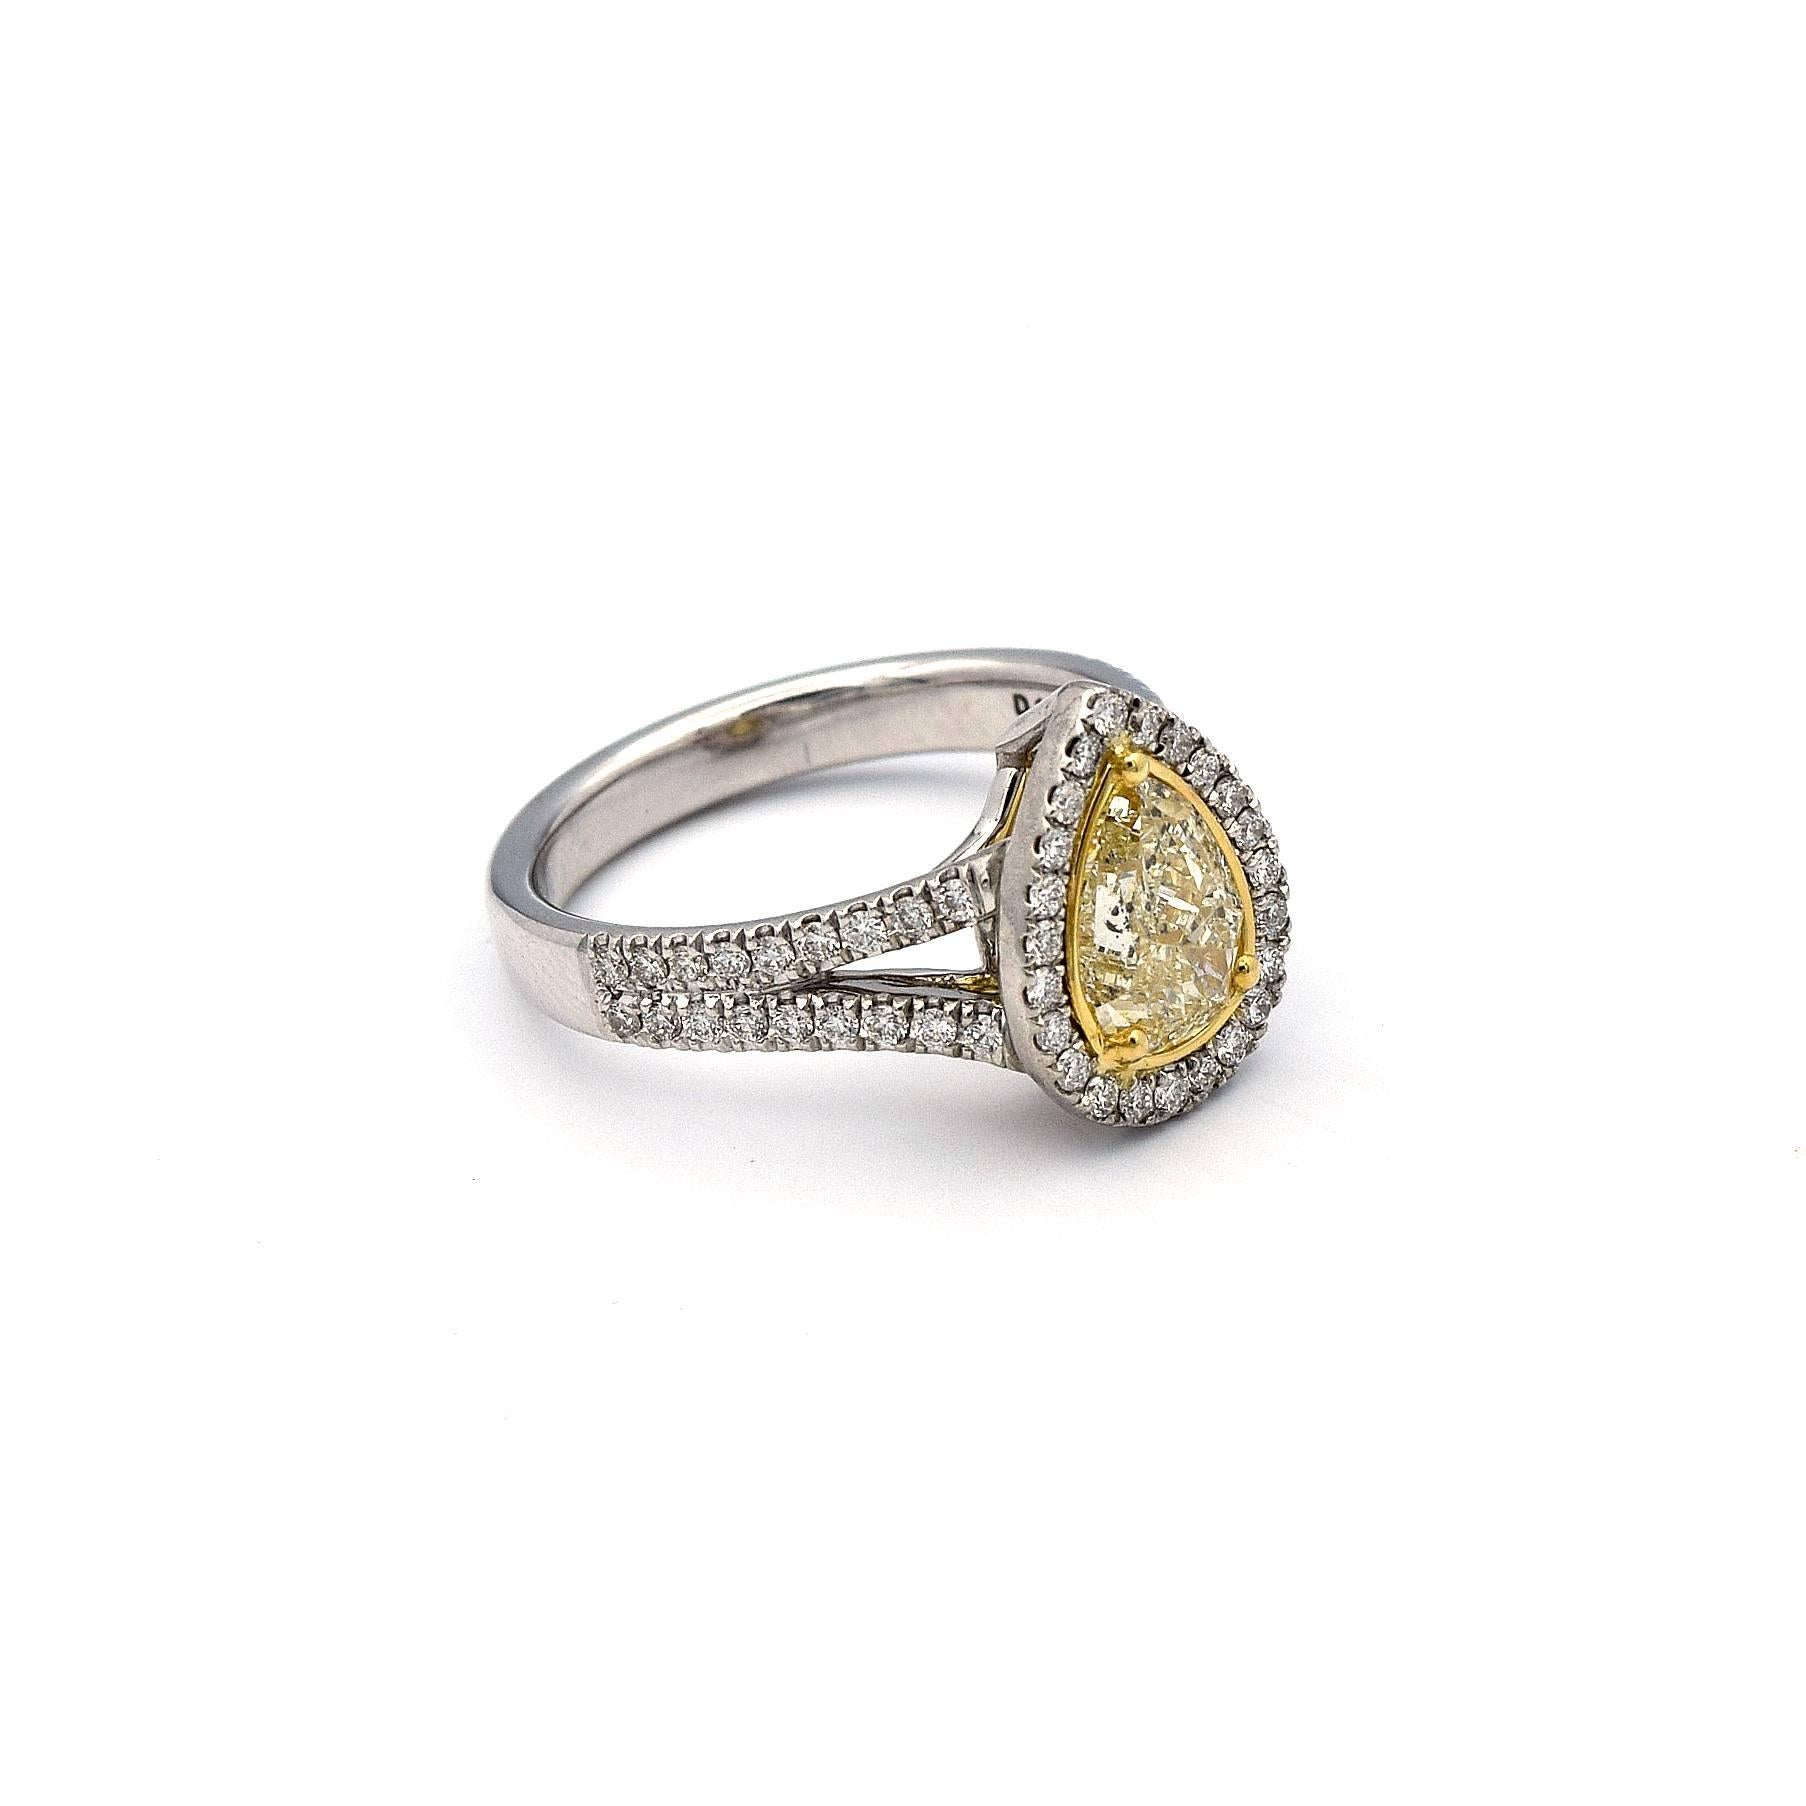 This Pear Shaped Natural Yellow Diamond weights 1.00ct, along with 59 White Pave Diamonds weighting 0.43ct. This is truly a beautifully crafted ring, for an occasion. 

Mounted in 14K White and Yellow Gold, giving the ring a total weight of 5.48